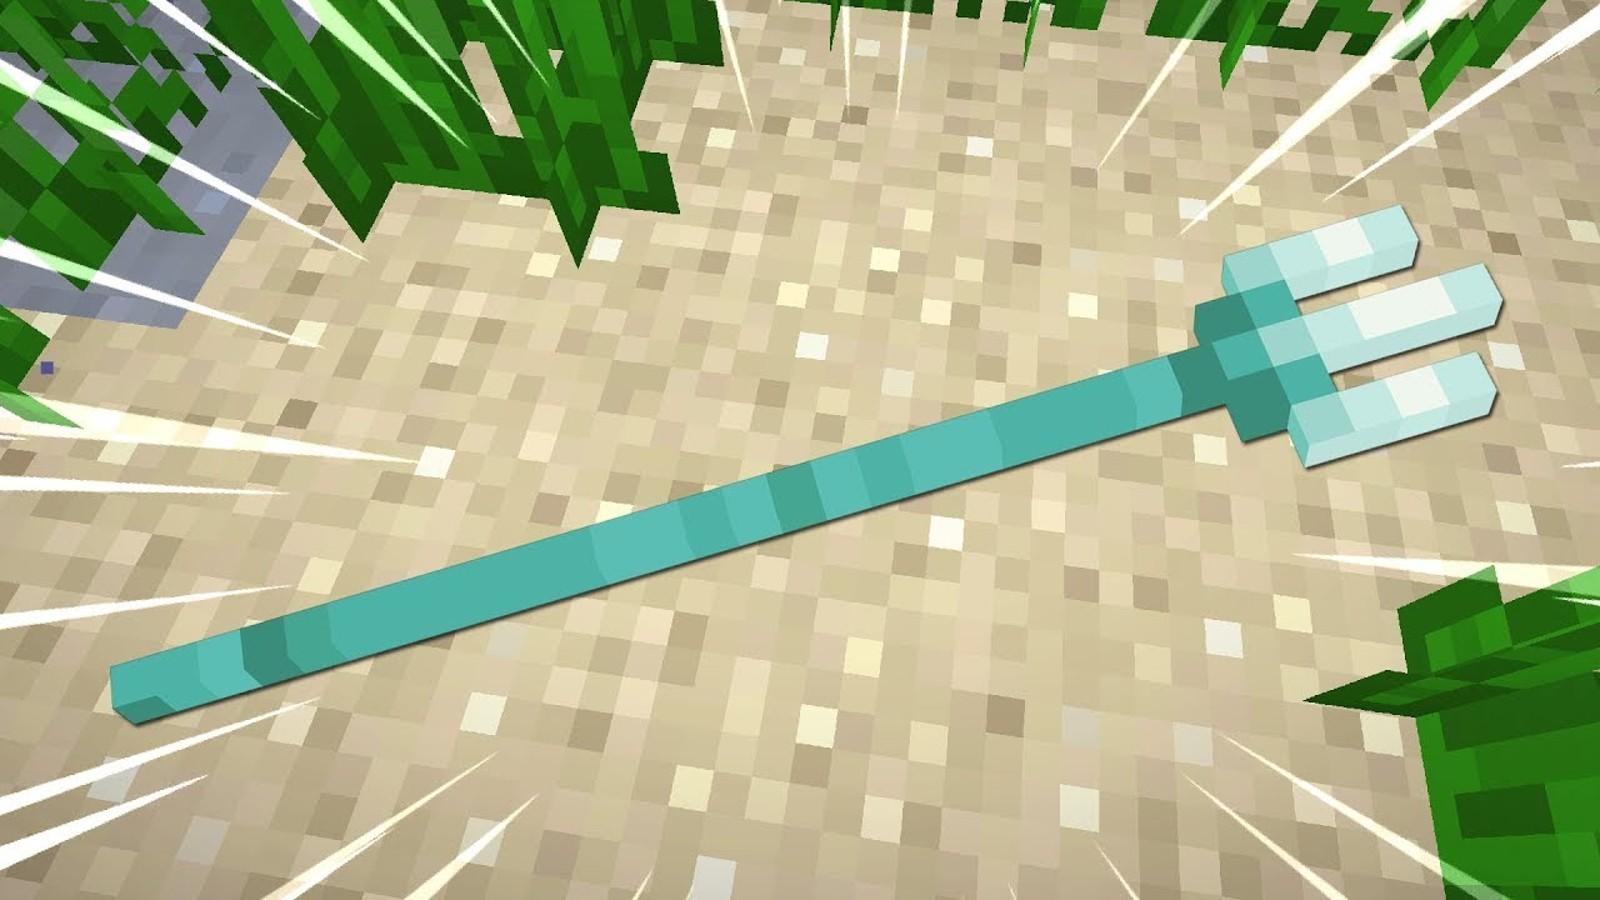 An image of a Trident in Minecraft that players can use the channeling enchantment on.